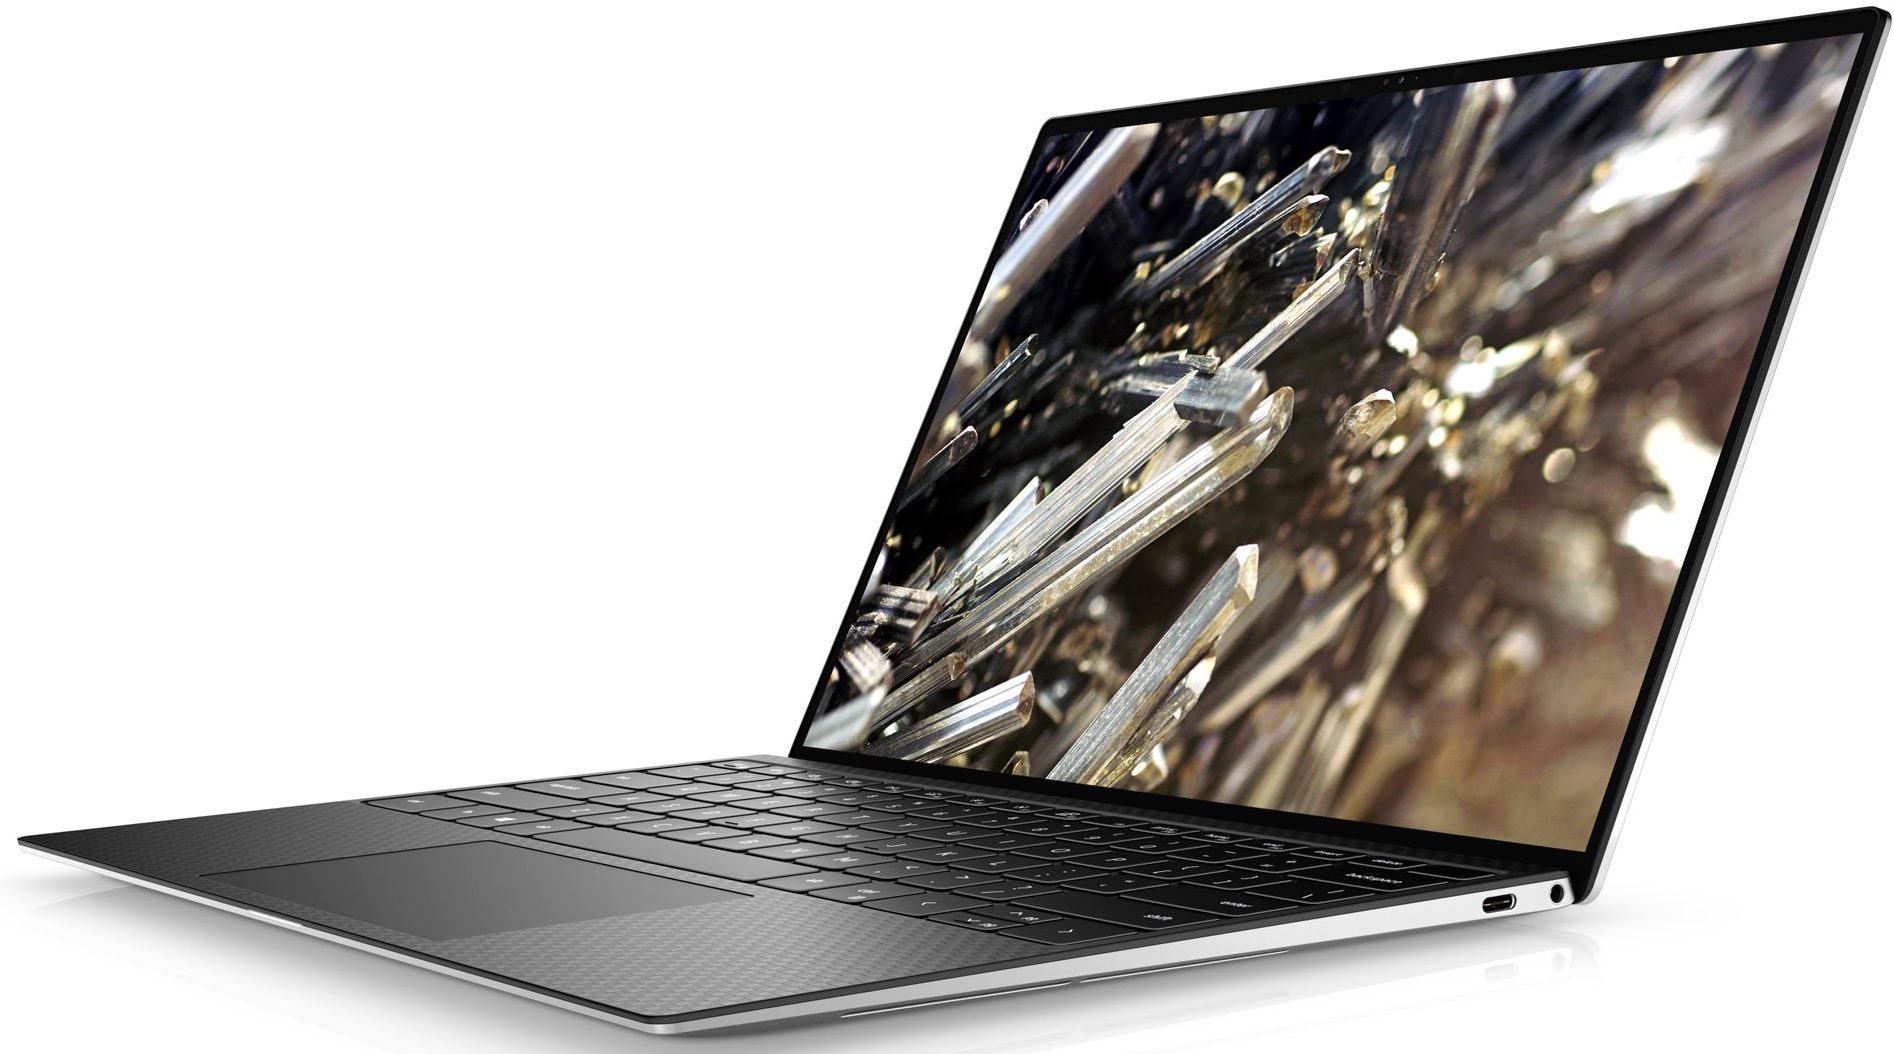 Dell XPS 13 9300 (2020) - Specs, Tests, and Prices | LaptopMedia.com